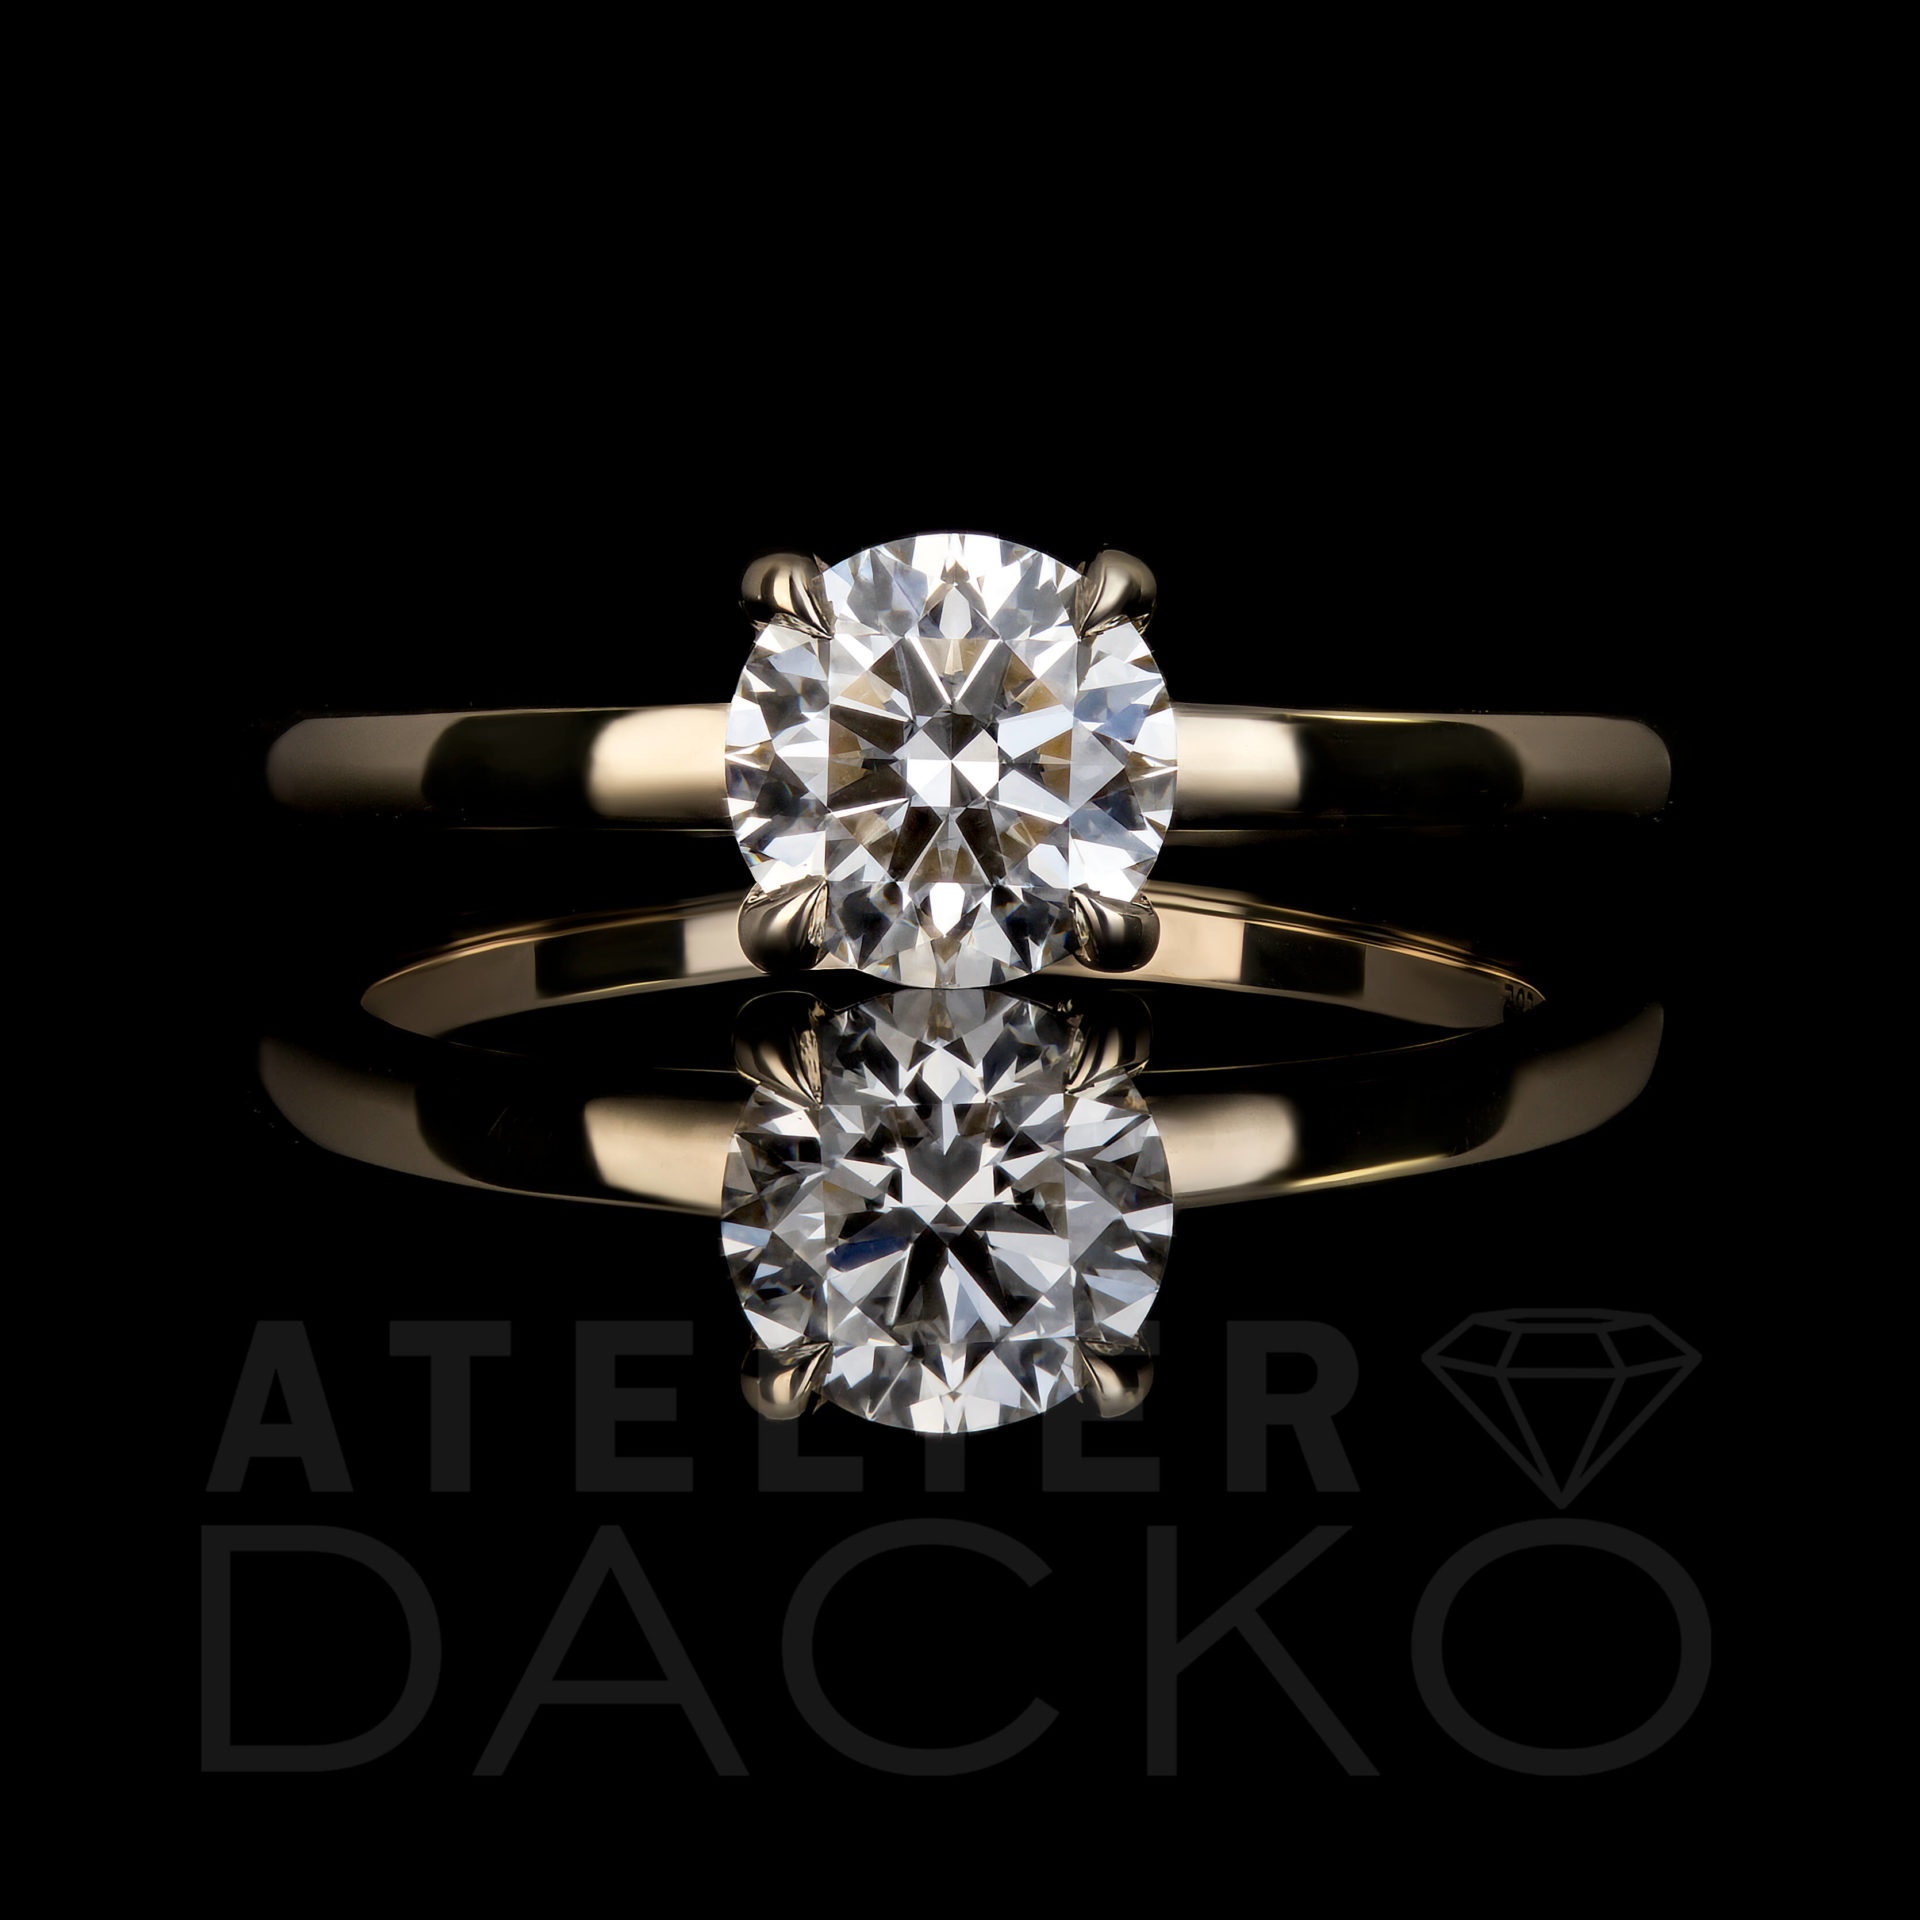 AD034 - 0.60 CT Round Diamond Solitaire Engagement Ring in Yellow Gold - 1